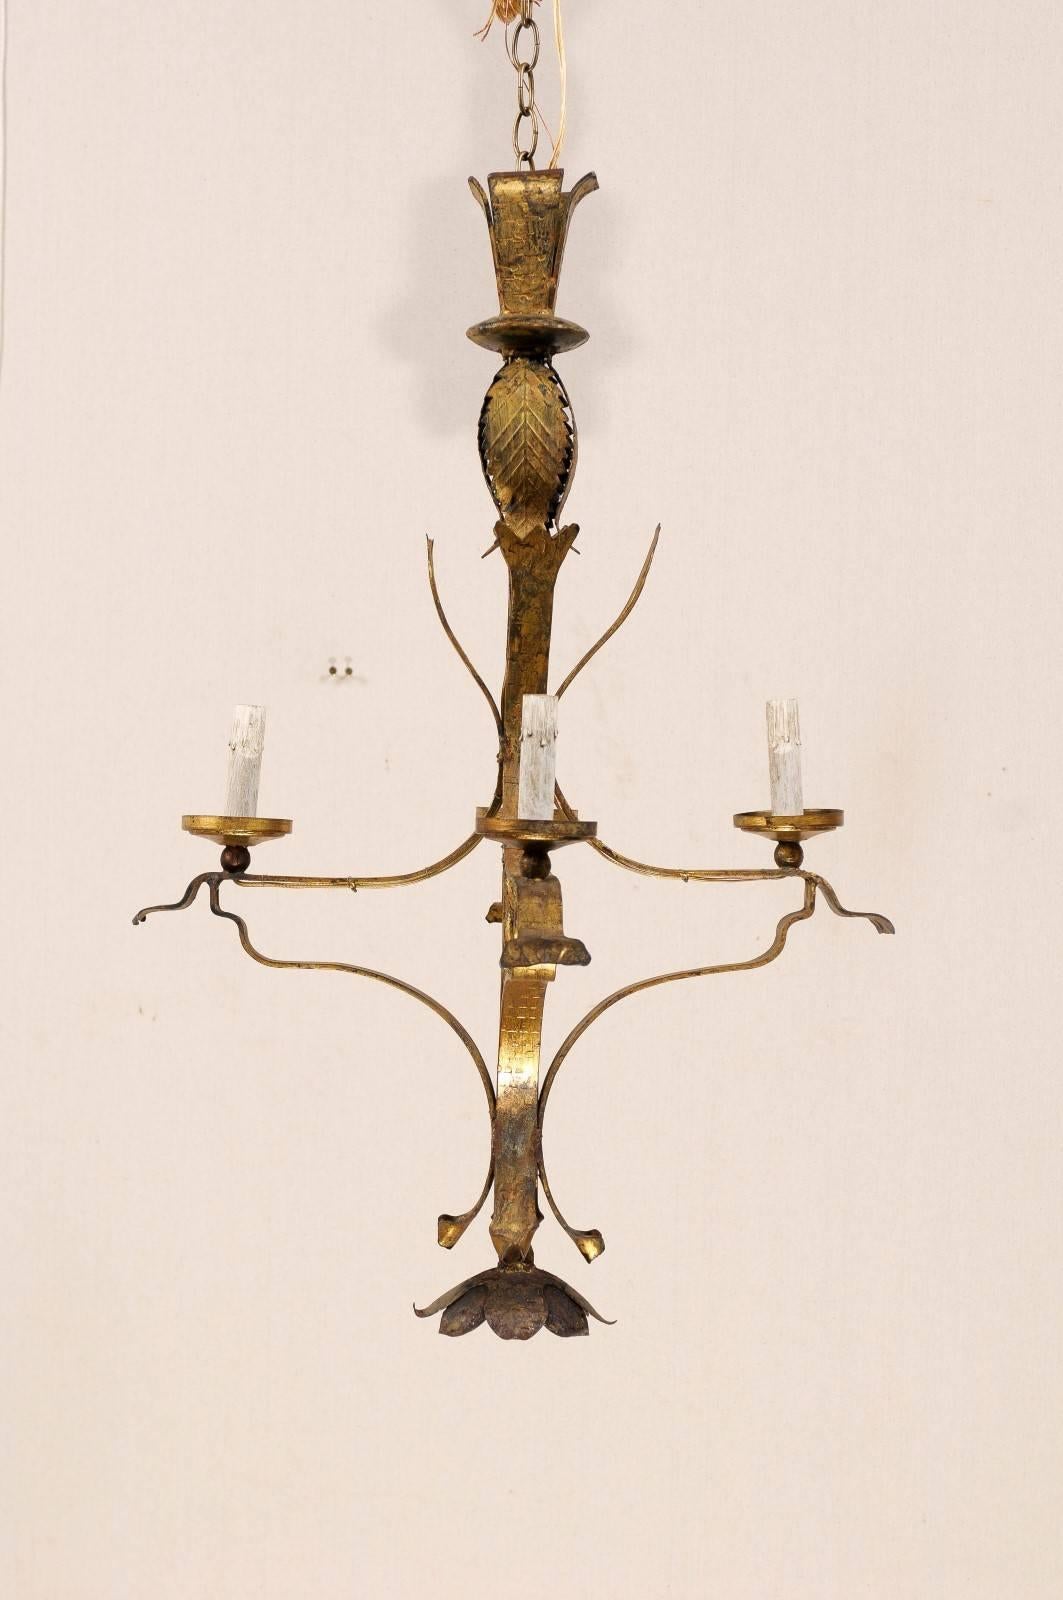 A French Vintage Gilt Iron Four-Light Chandelier with Floral Motif Finial 2